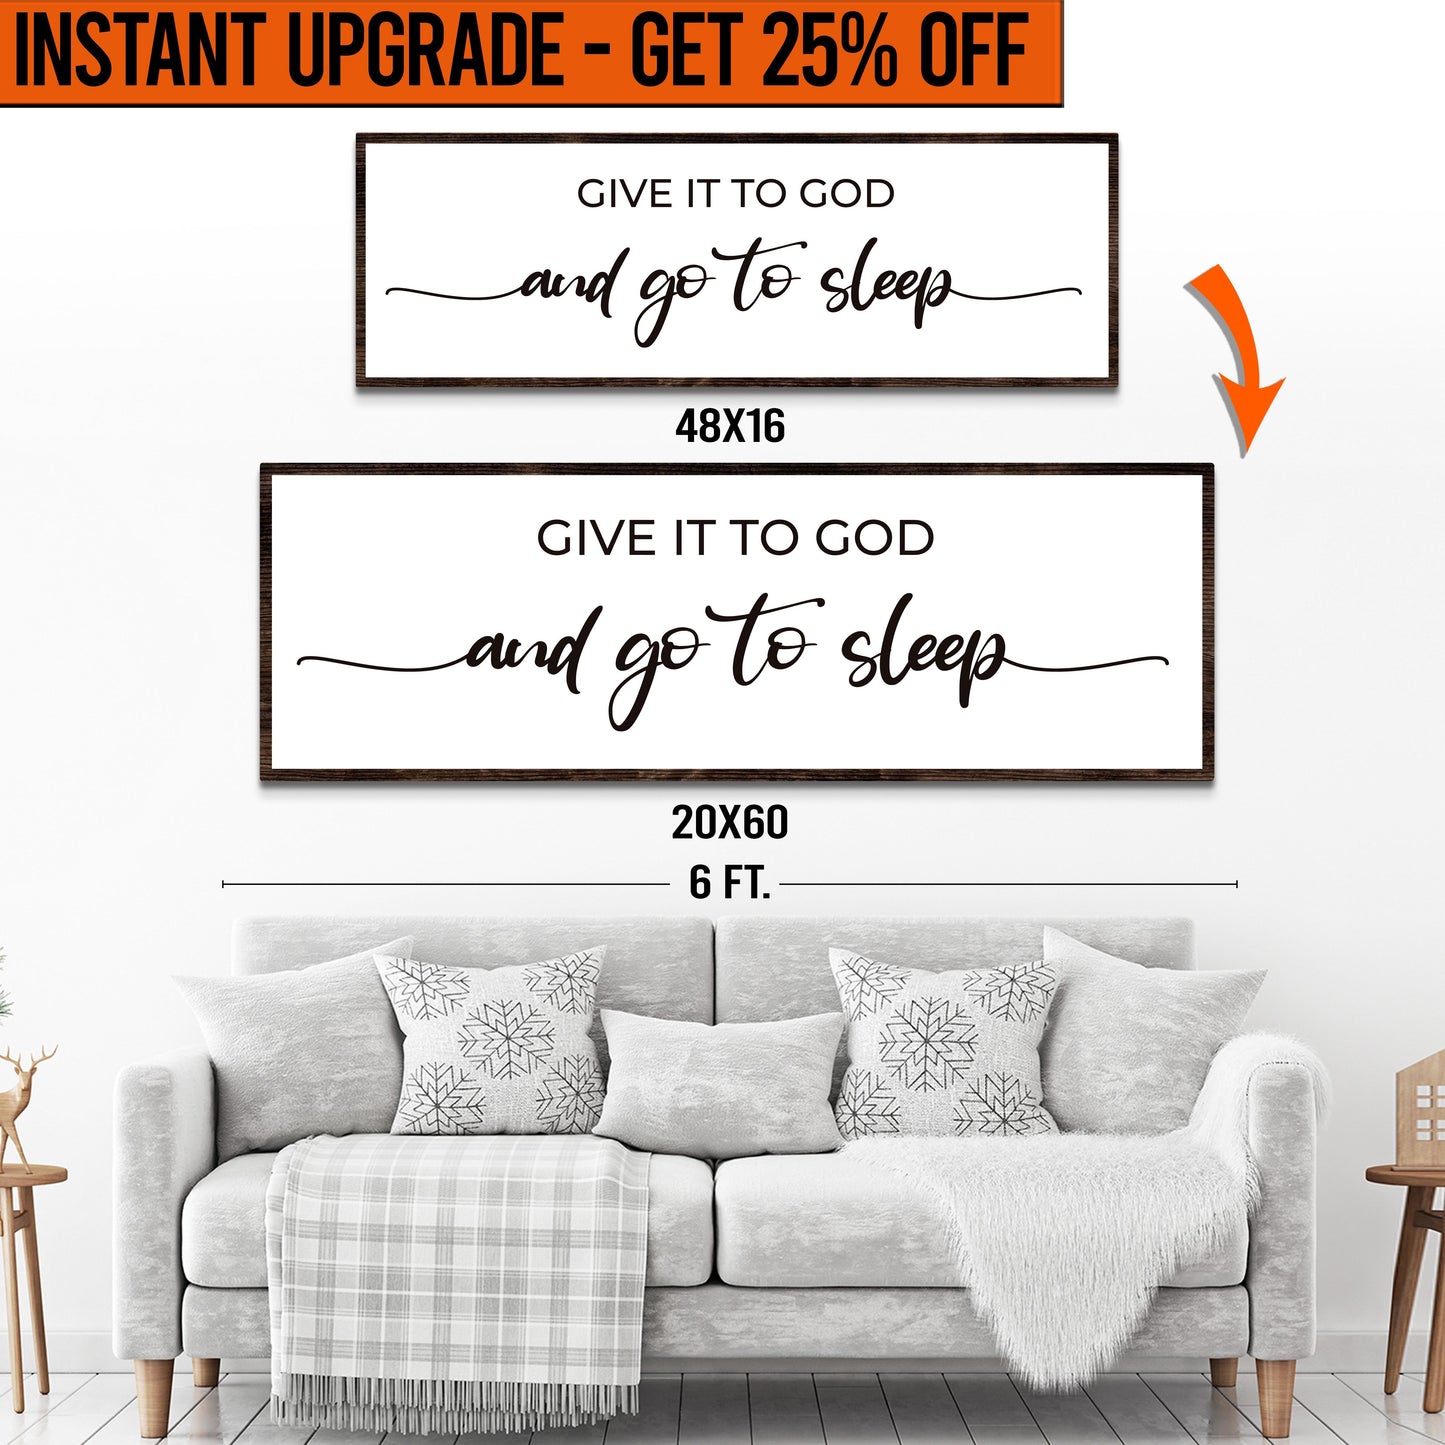 Upgrade Your 16x48 Inches 'GIVE IT TO GOD AND GO TO SLEEP CLASSIC' (Style 1) Canvas To 20x60 Inches